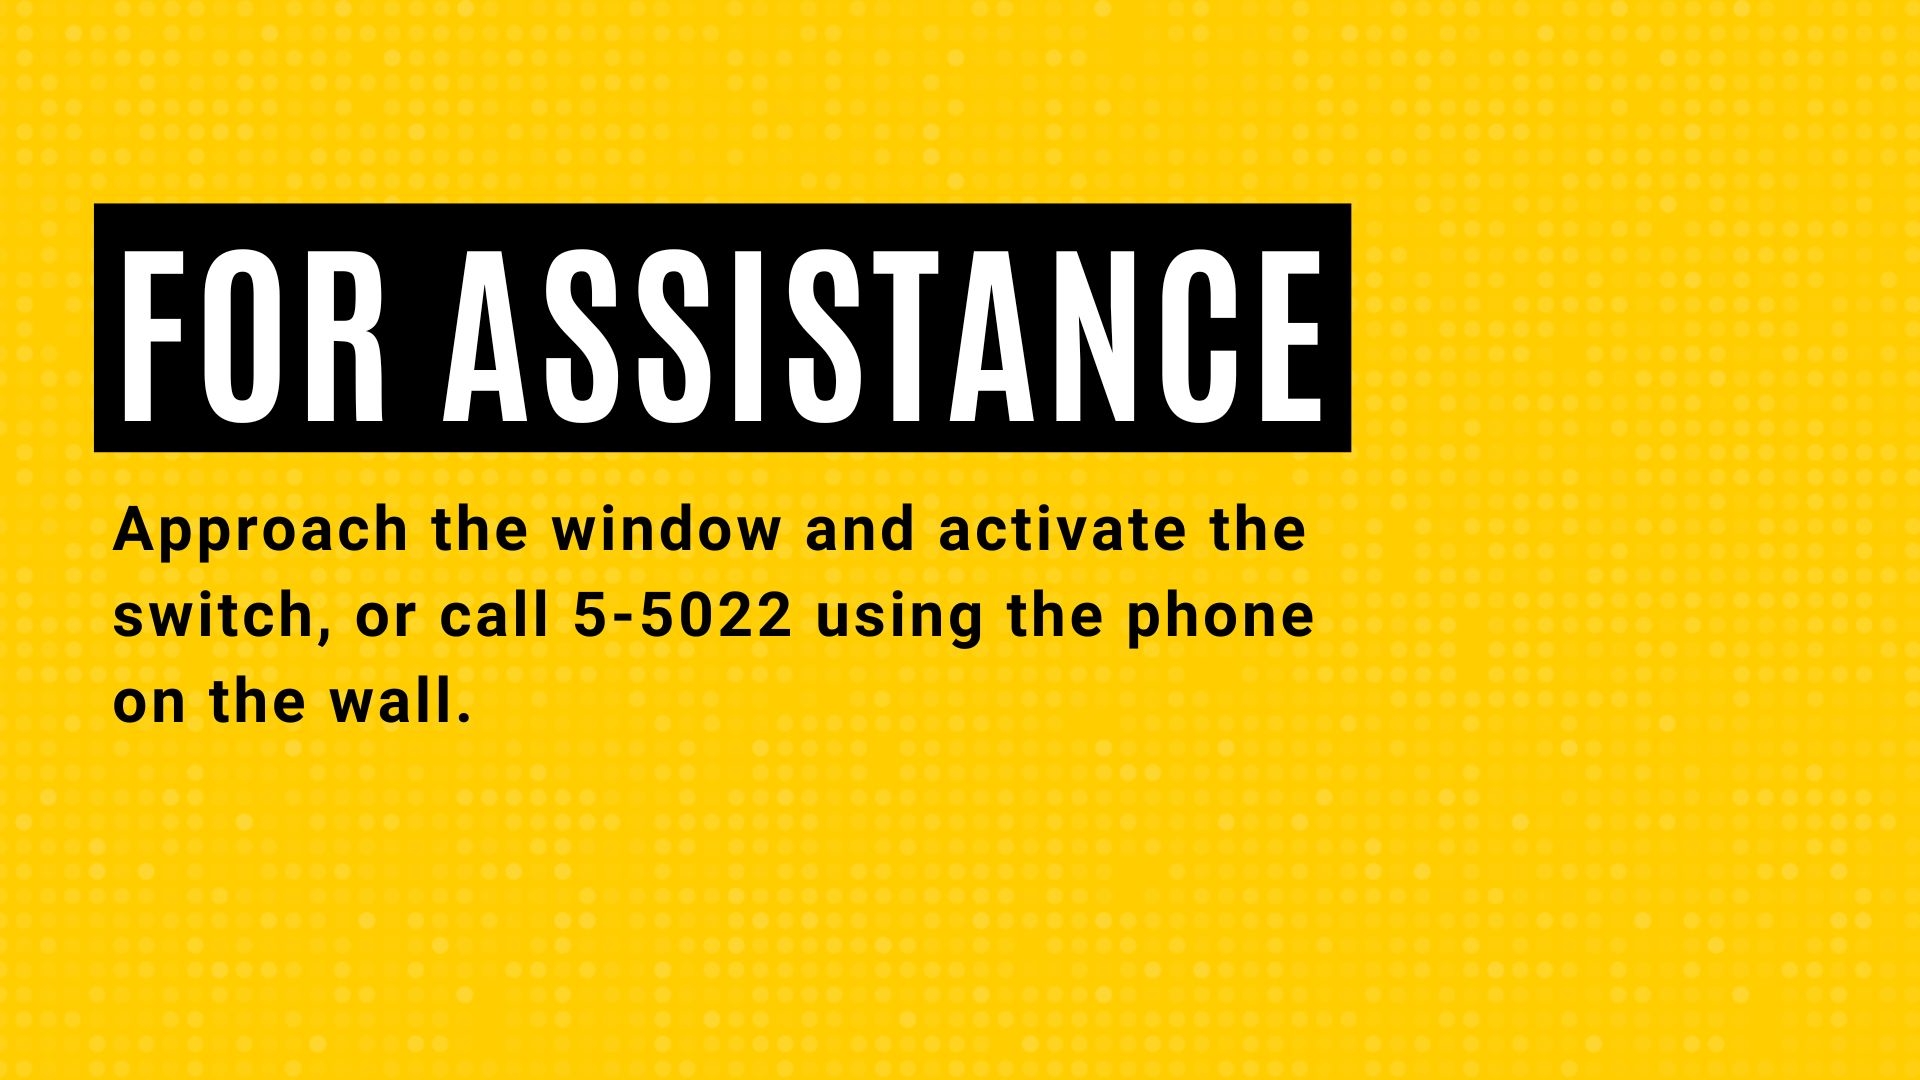 For Assistance approach the window and activate the switch, or call 5-5022 using the phone on the wall.